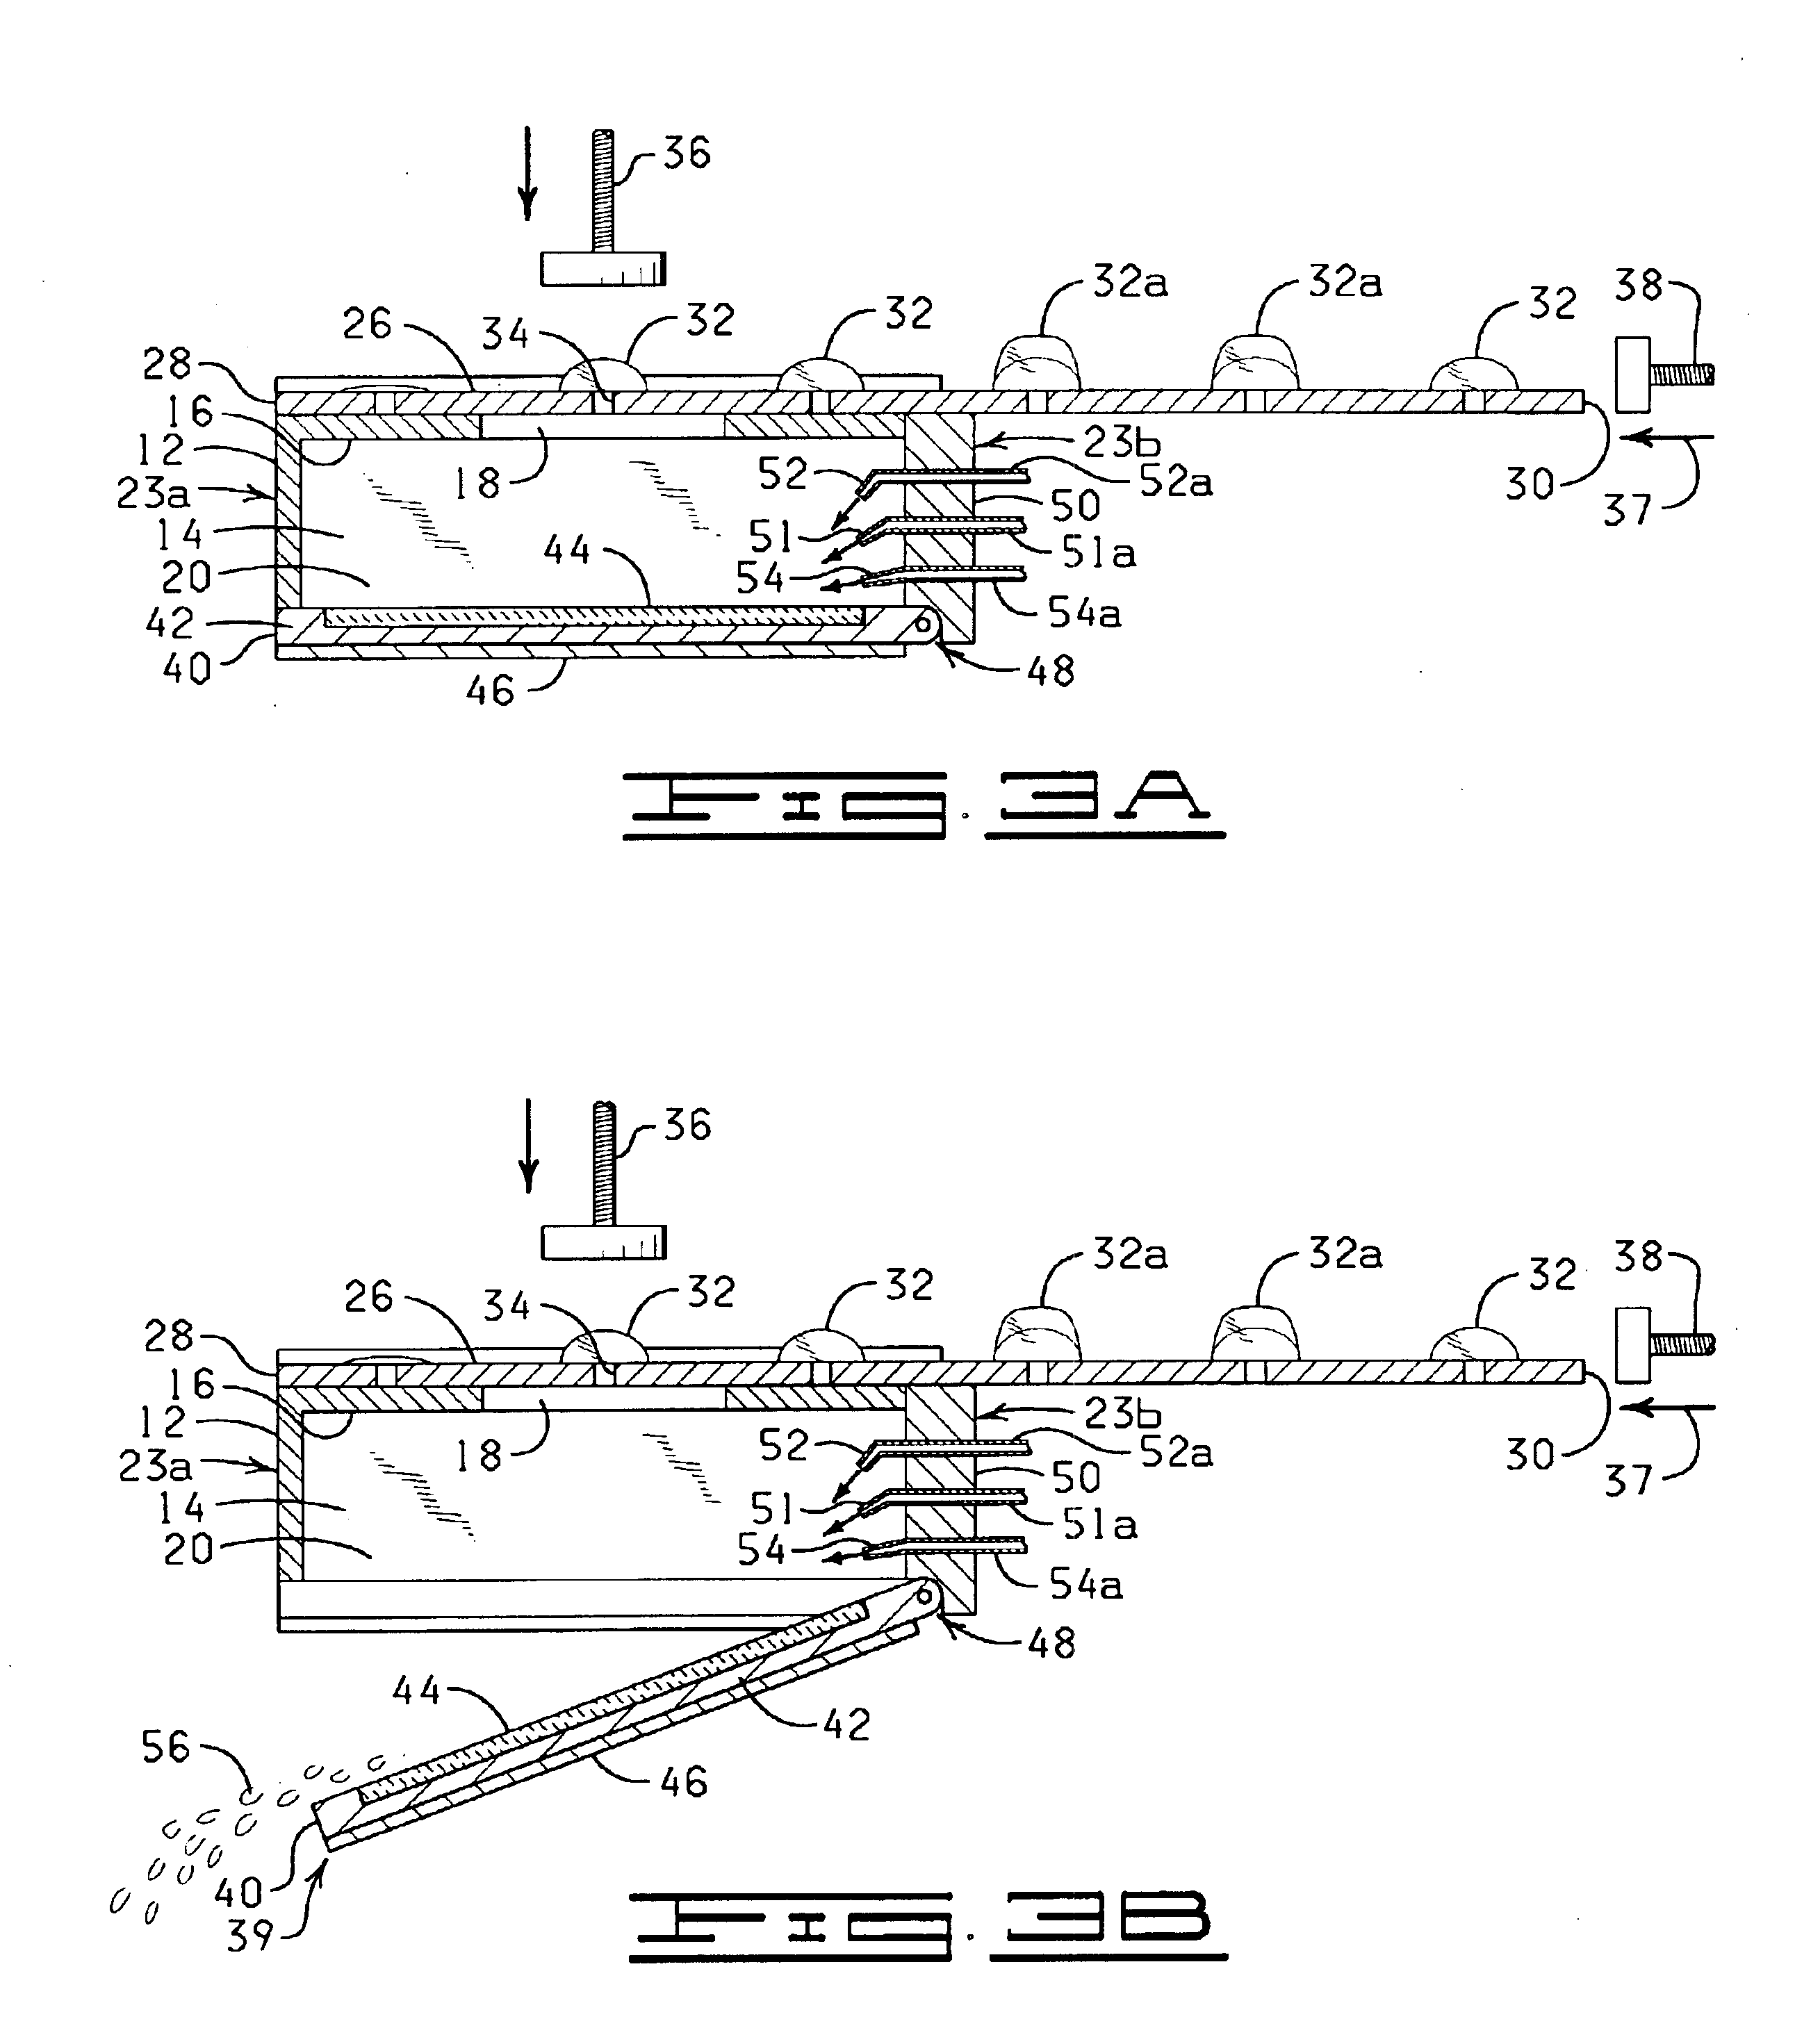 In situ heat induced antigen recovery and staining apparatus and method